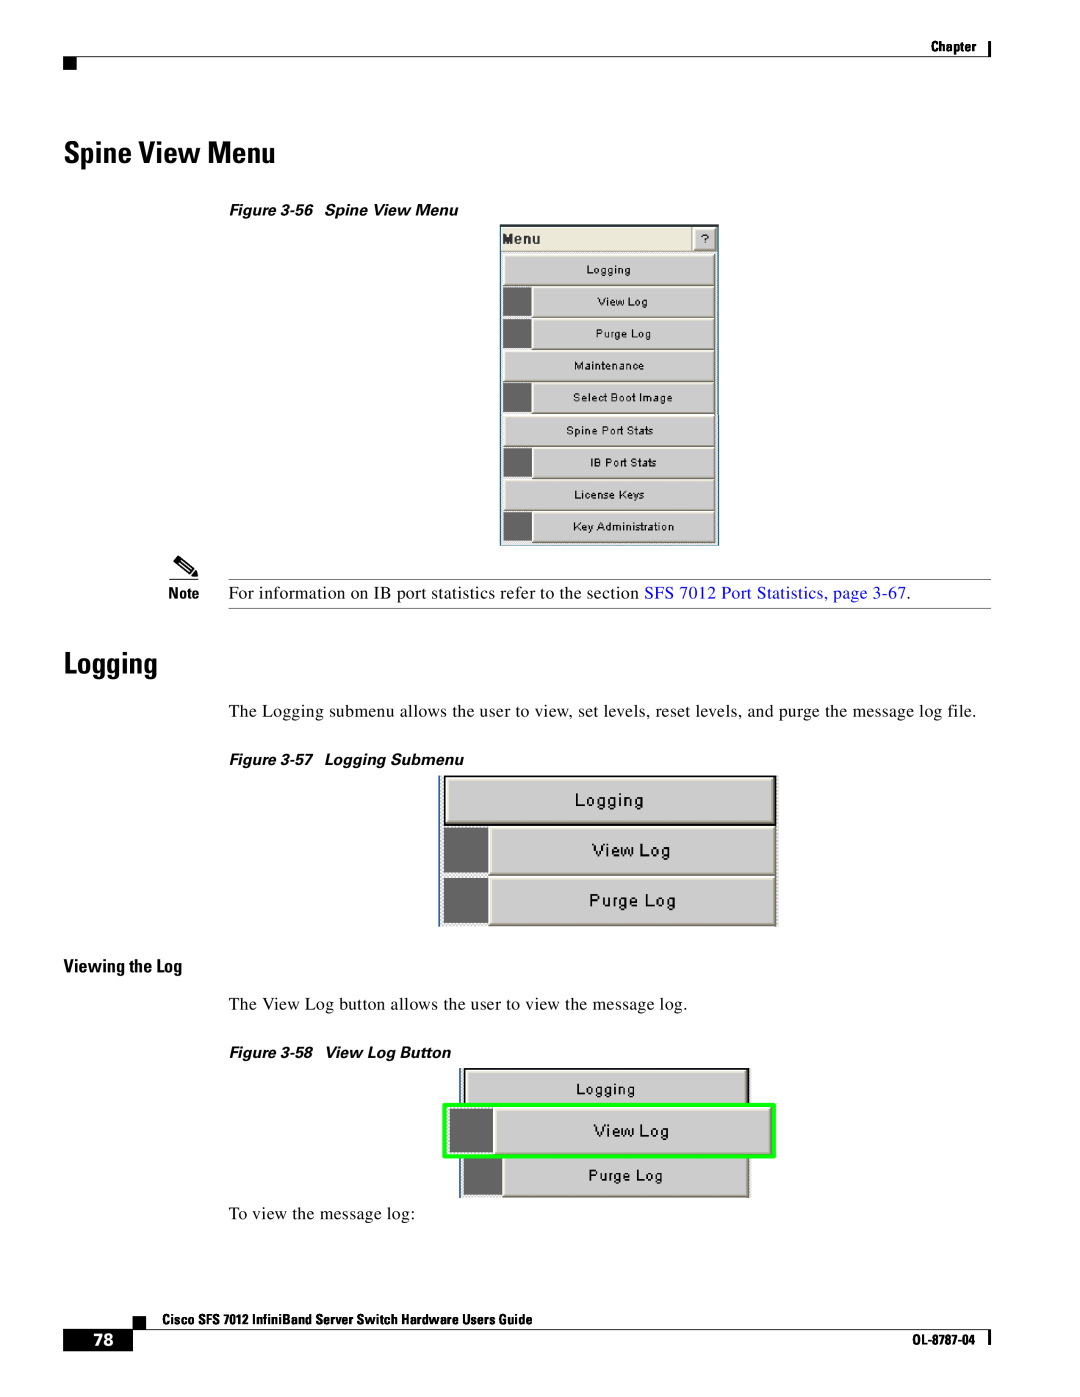 Cisco Systems SFS 7012 manual Spine View Menu, Viewing the Log, Logging 